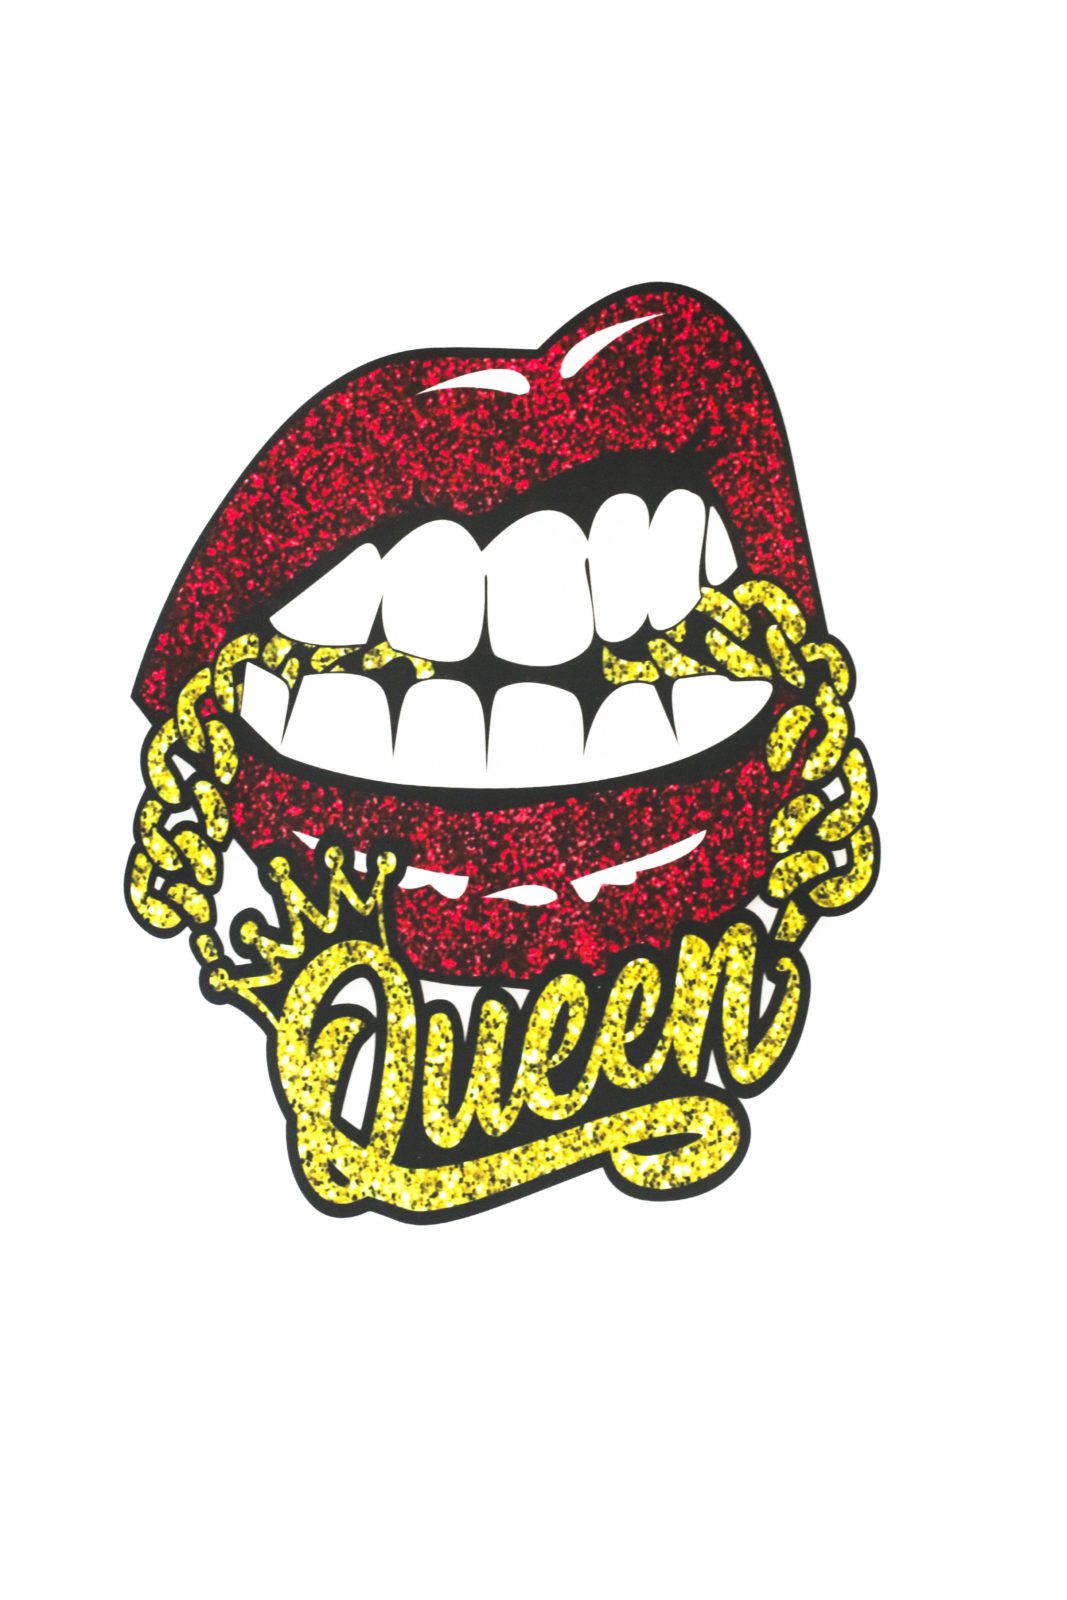 Queen lip Iron on heat transfer patches